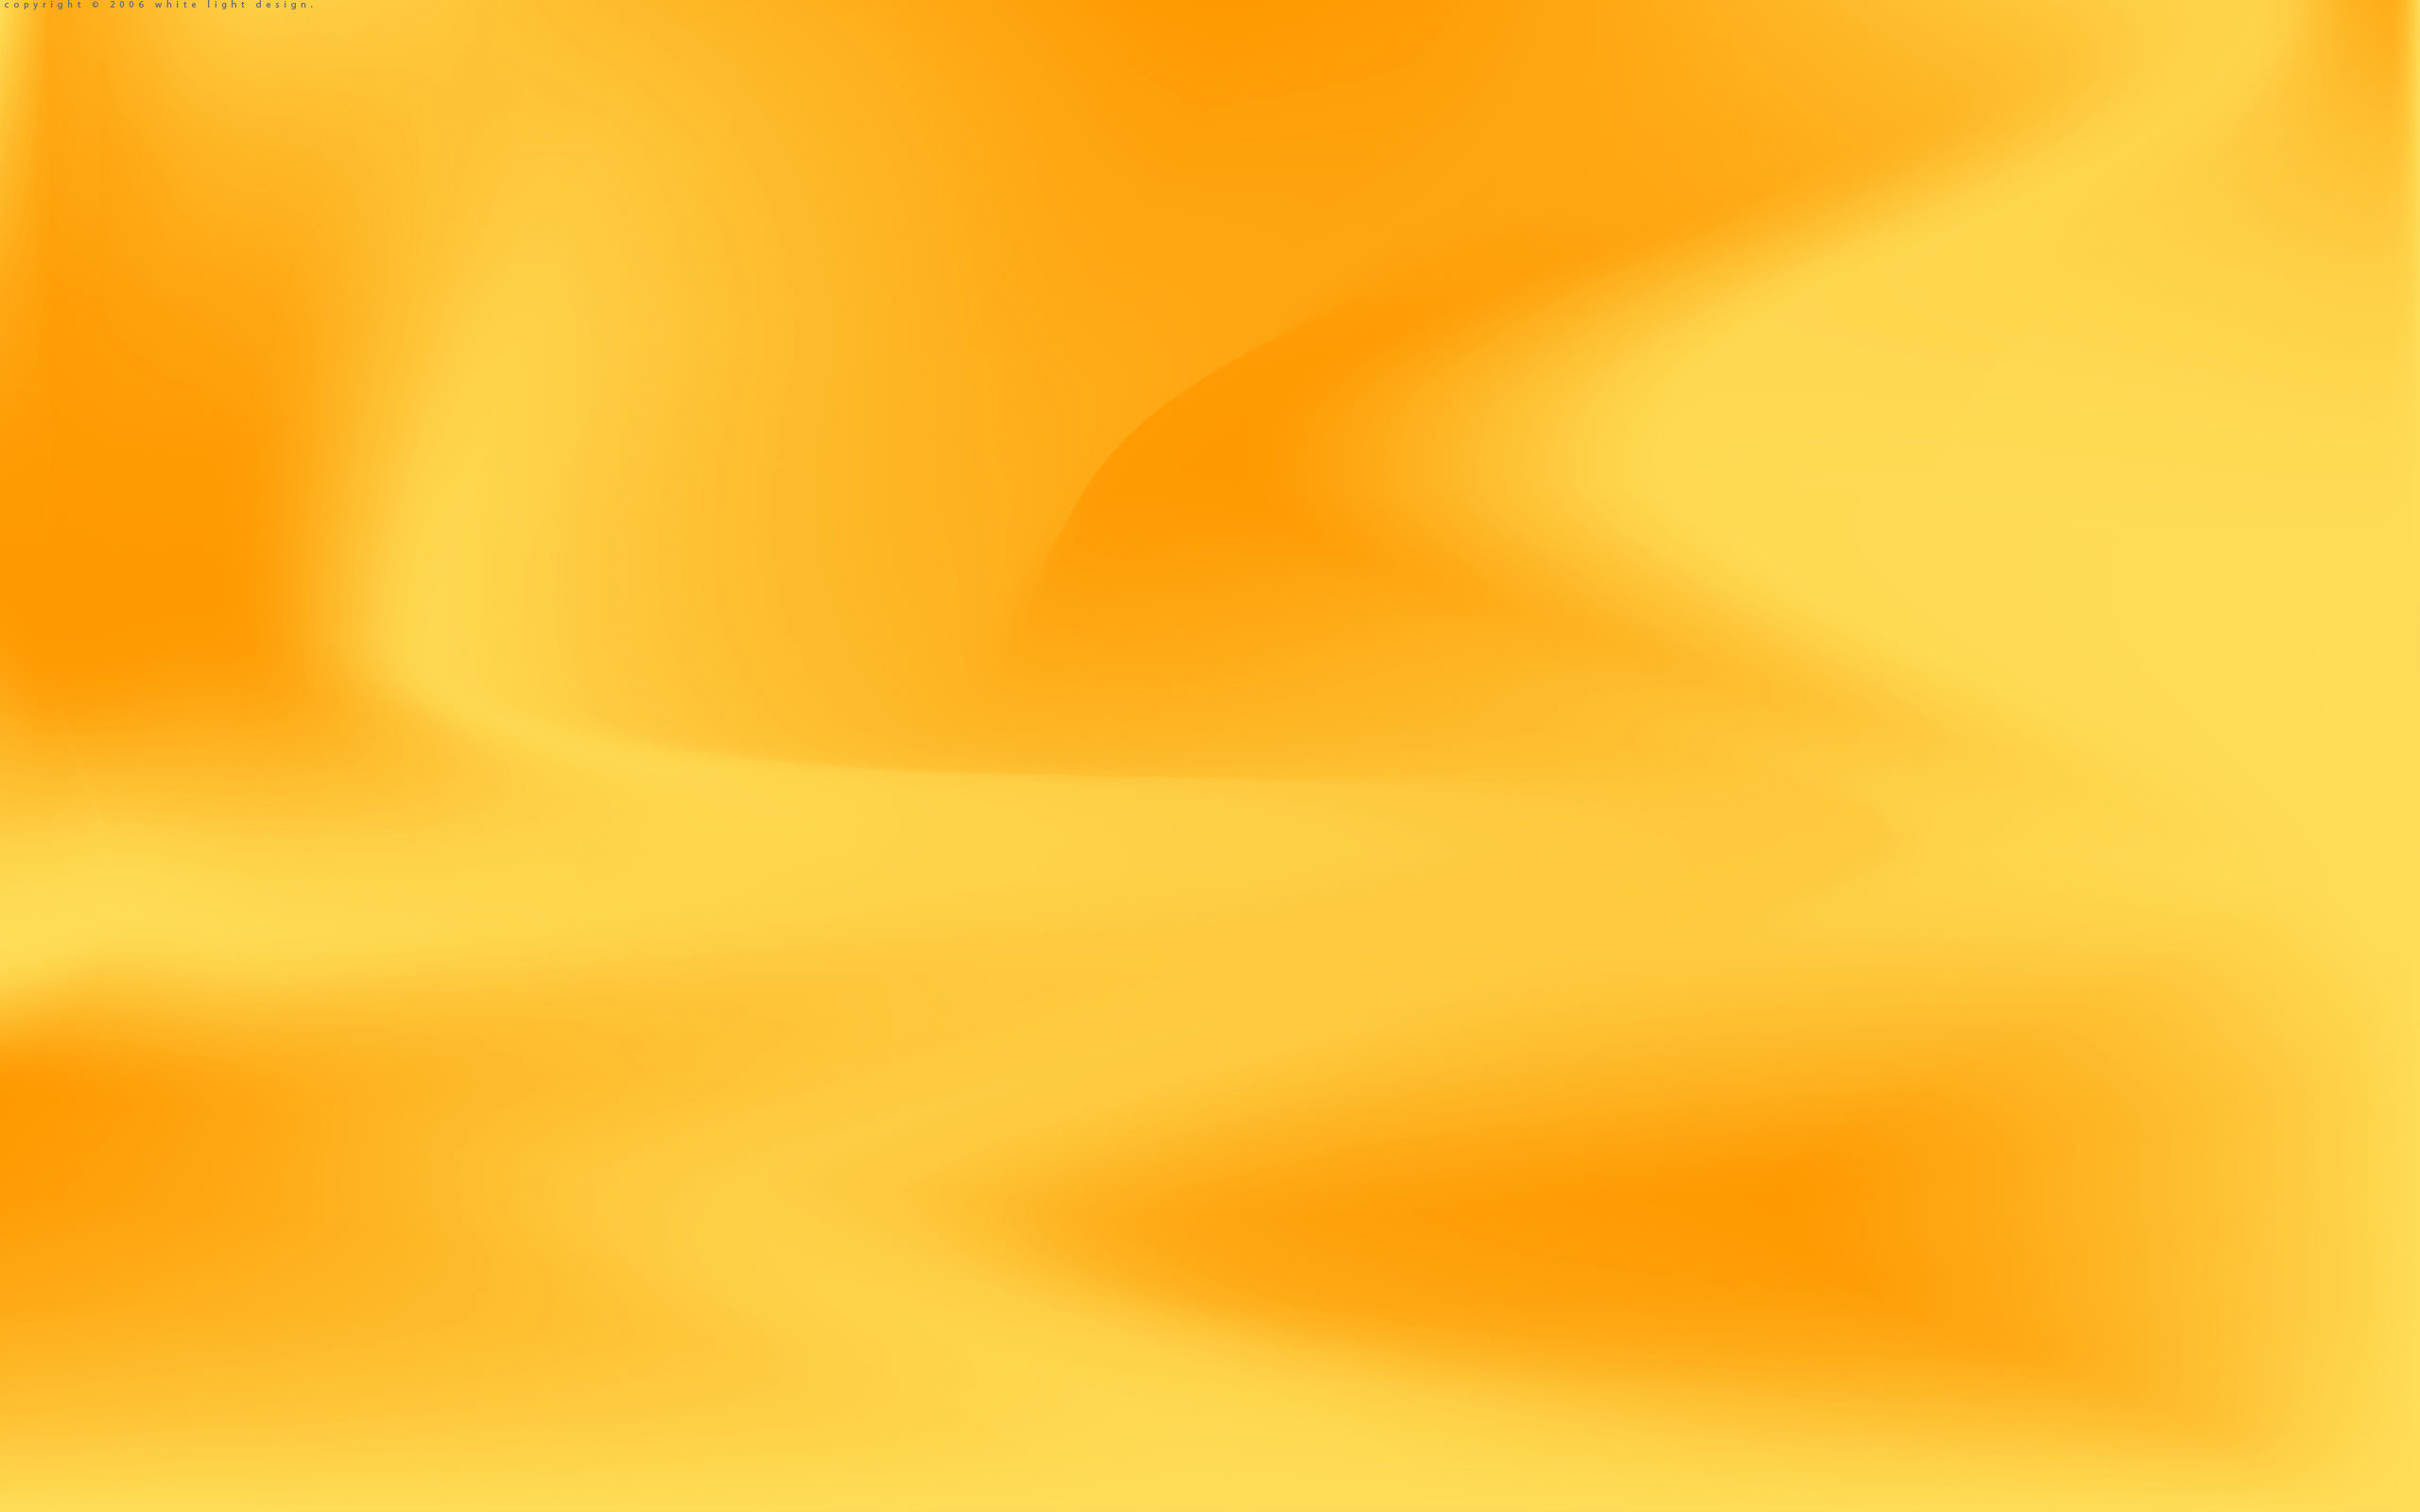 High Quality Plain Yellow background